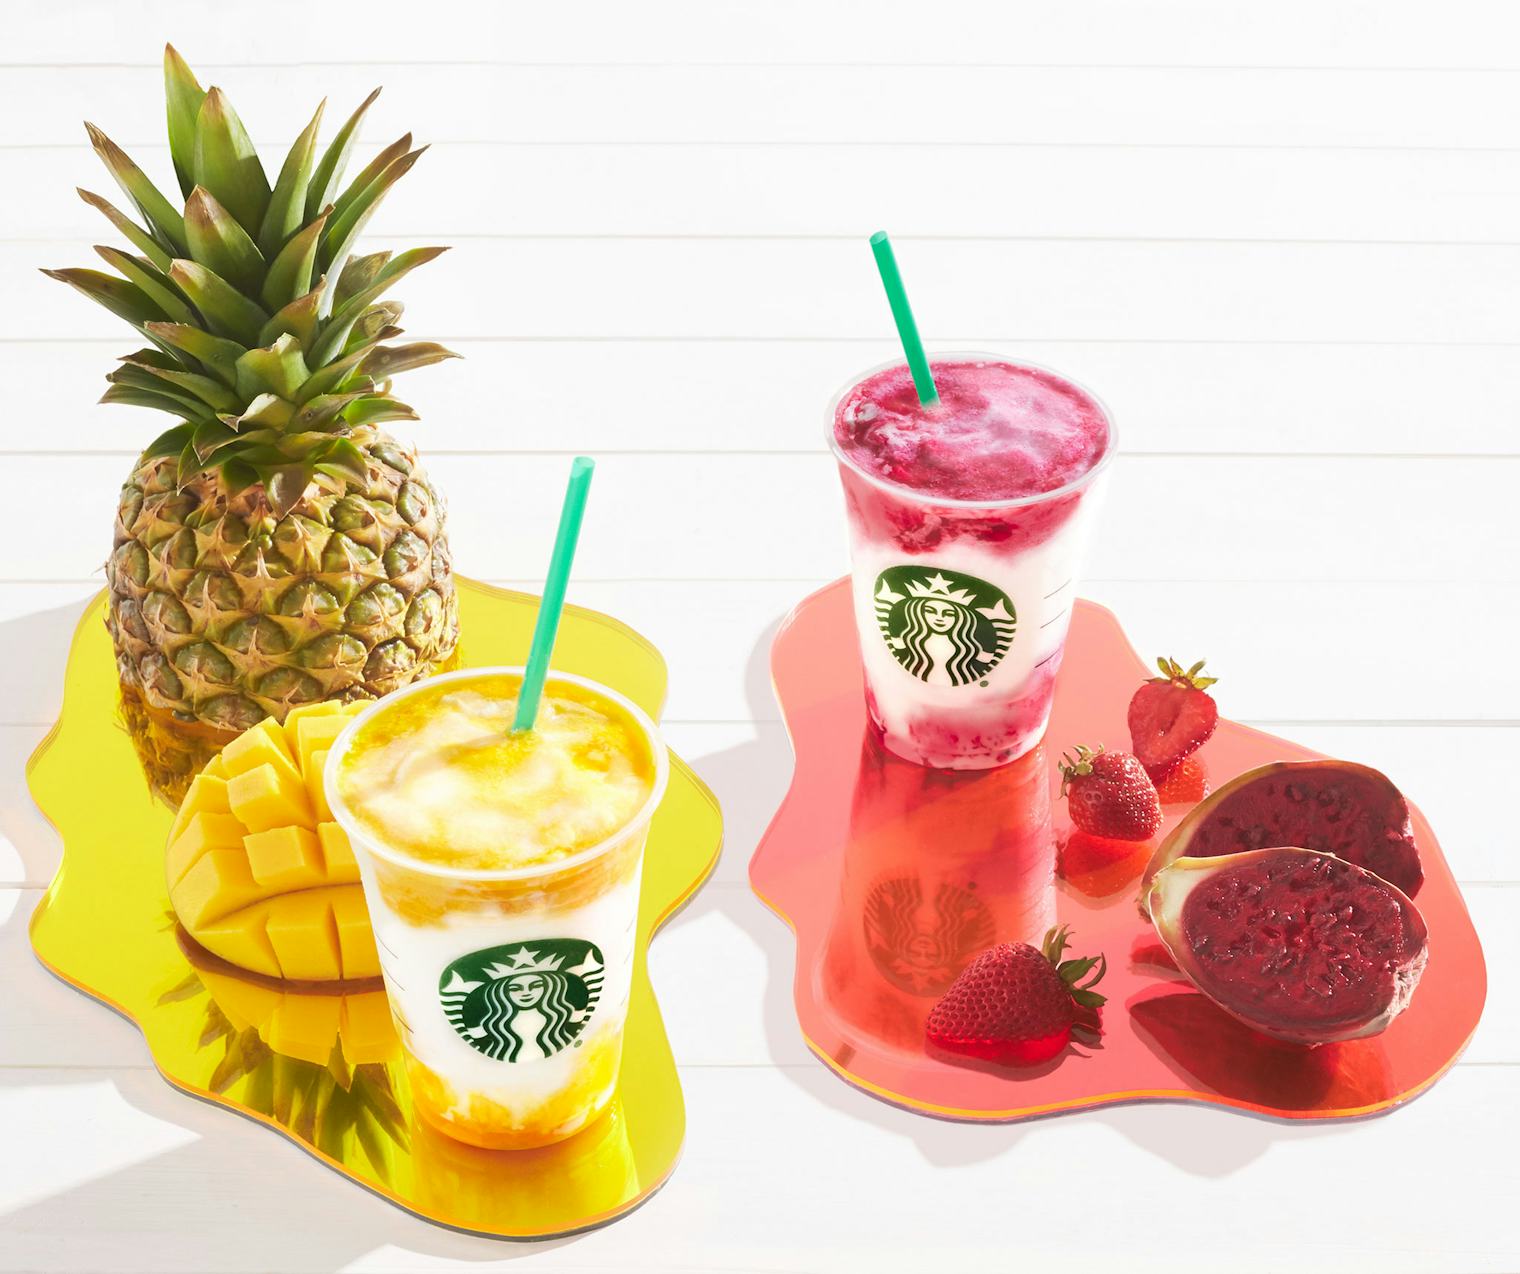 What's In Starbucks' New Mango Pineapple Frappuccino? It's A Taste Of